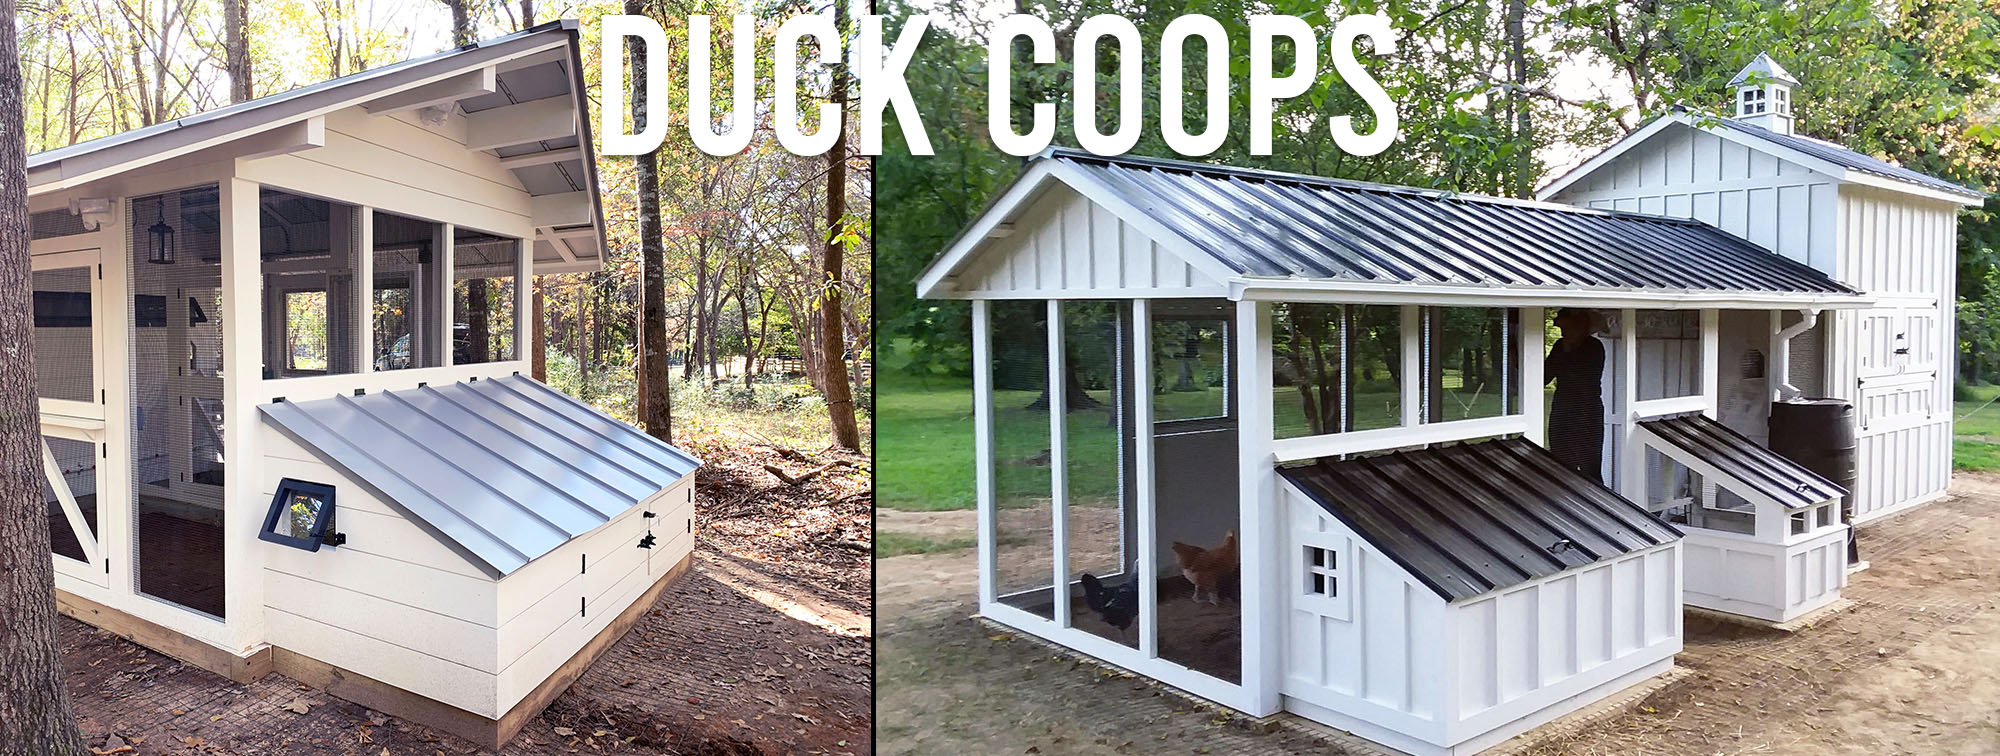 Duck Coops by Carolina Coops web banner